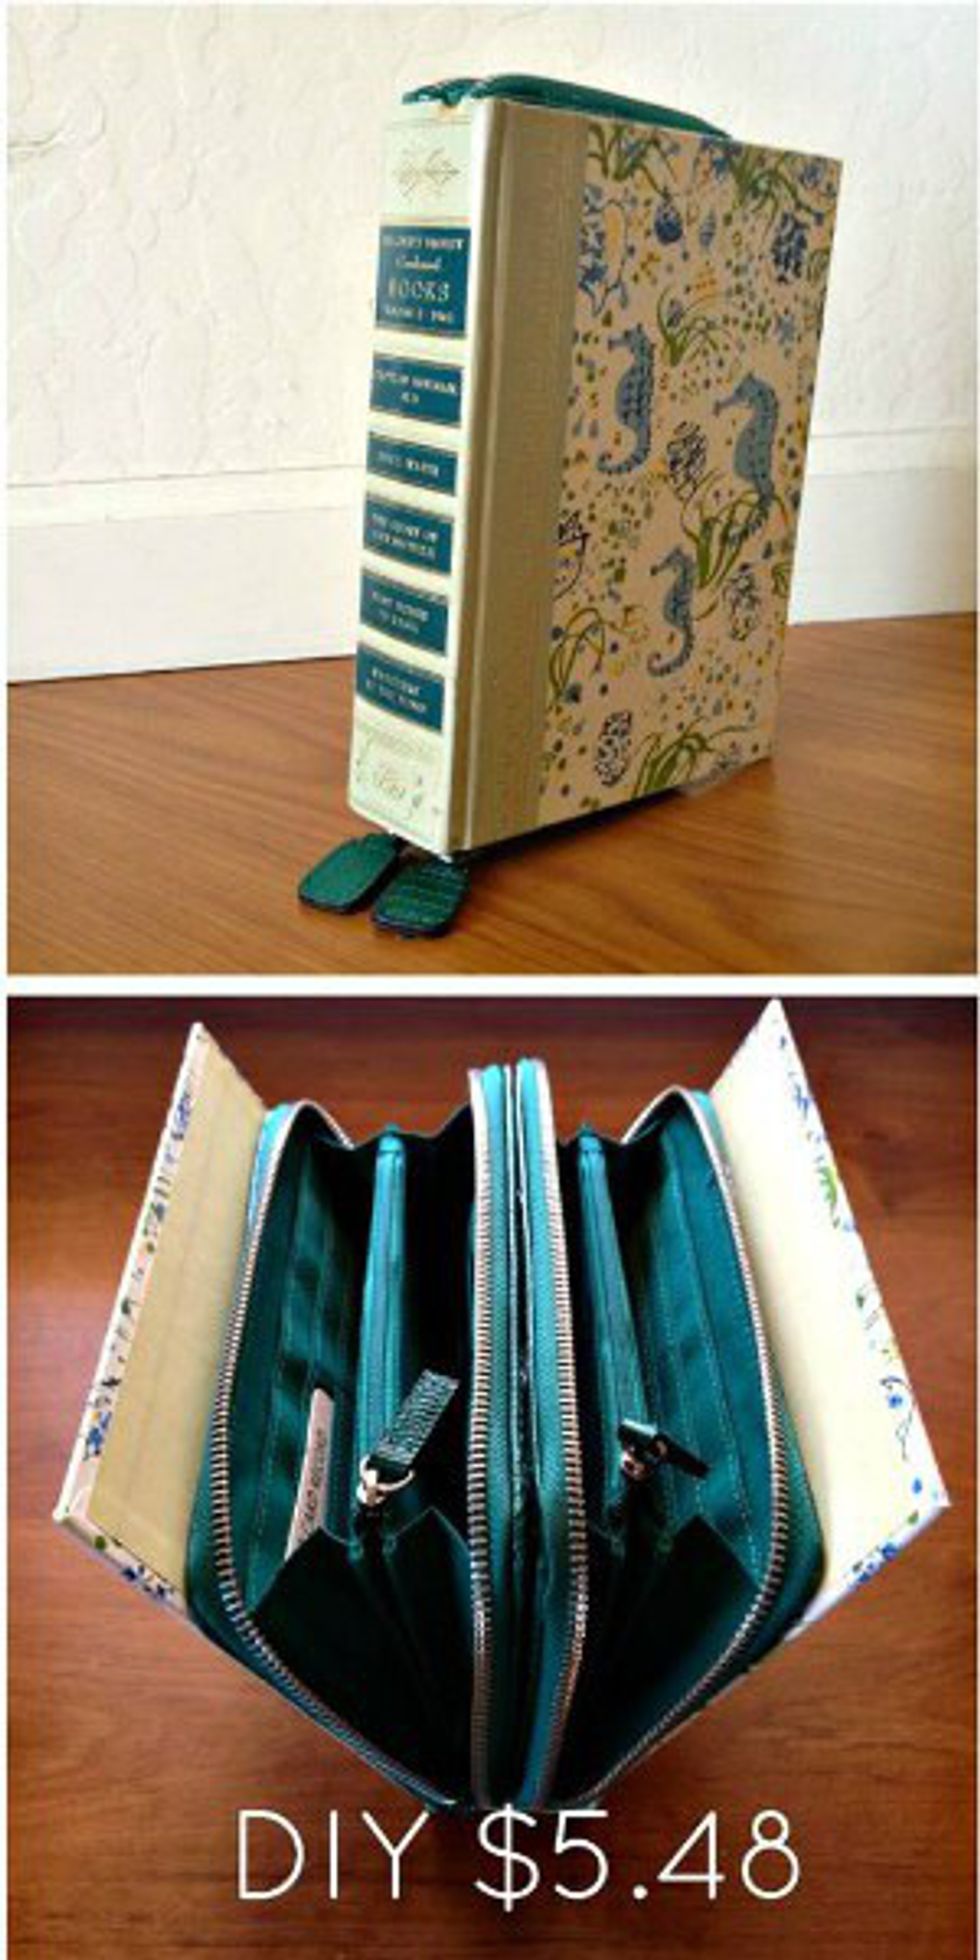 Five Diy Book Art Projects For Beginners 6576